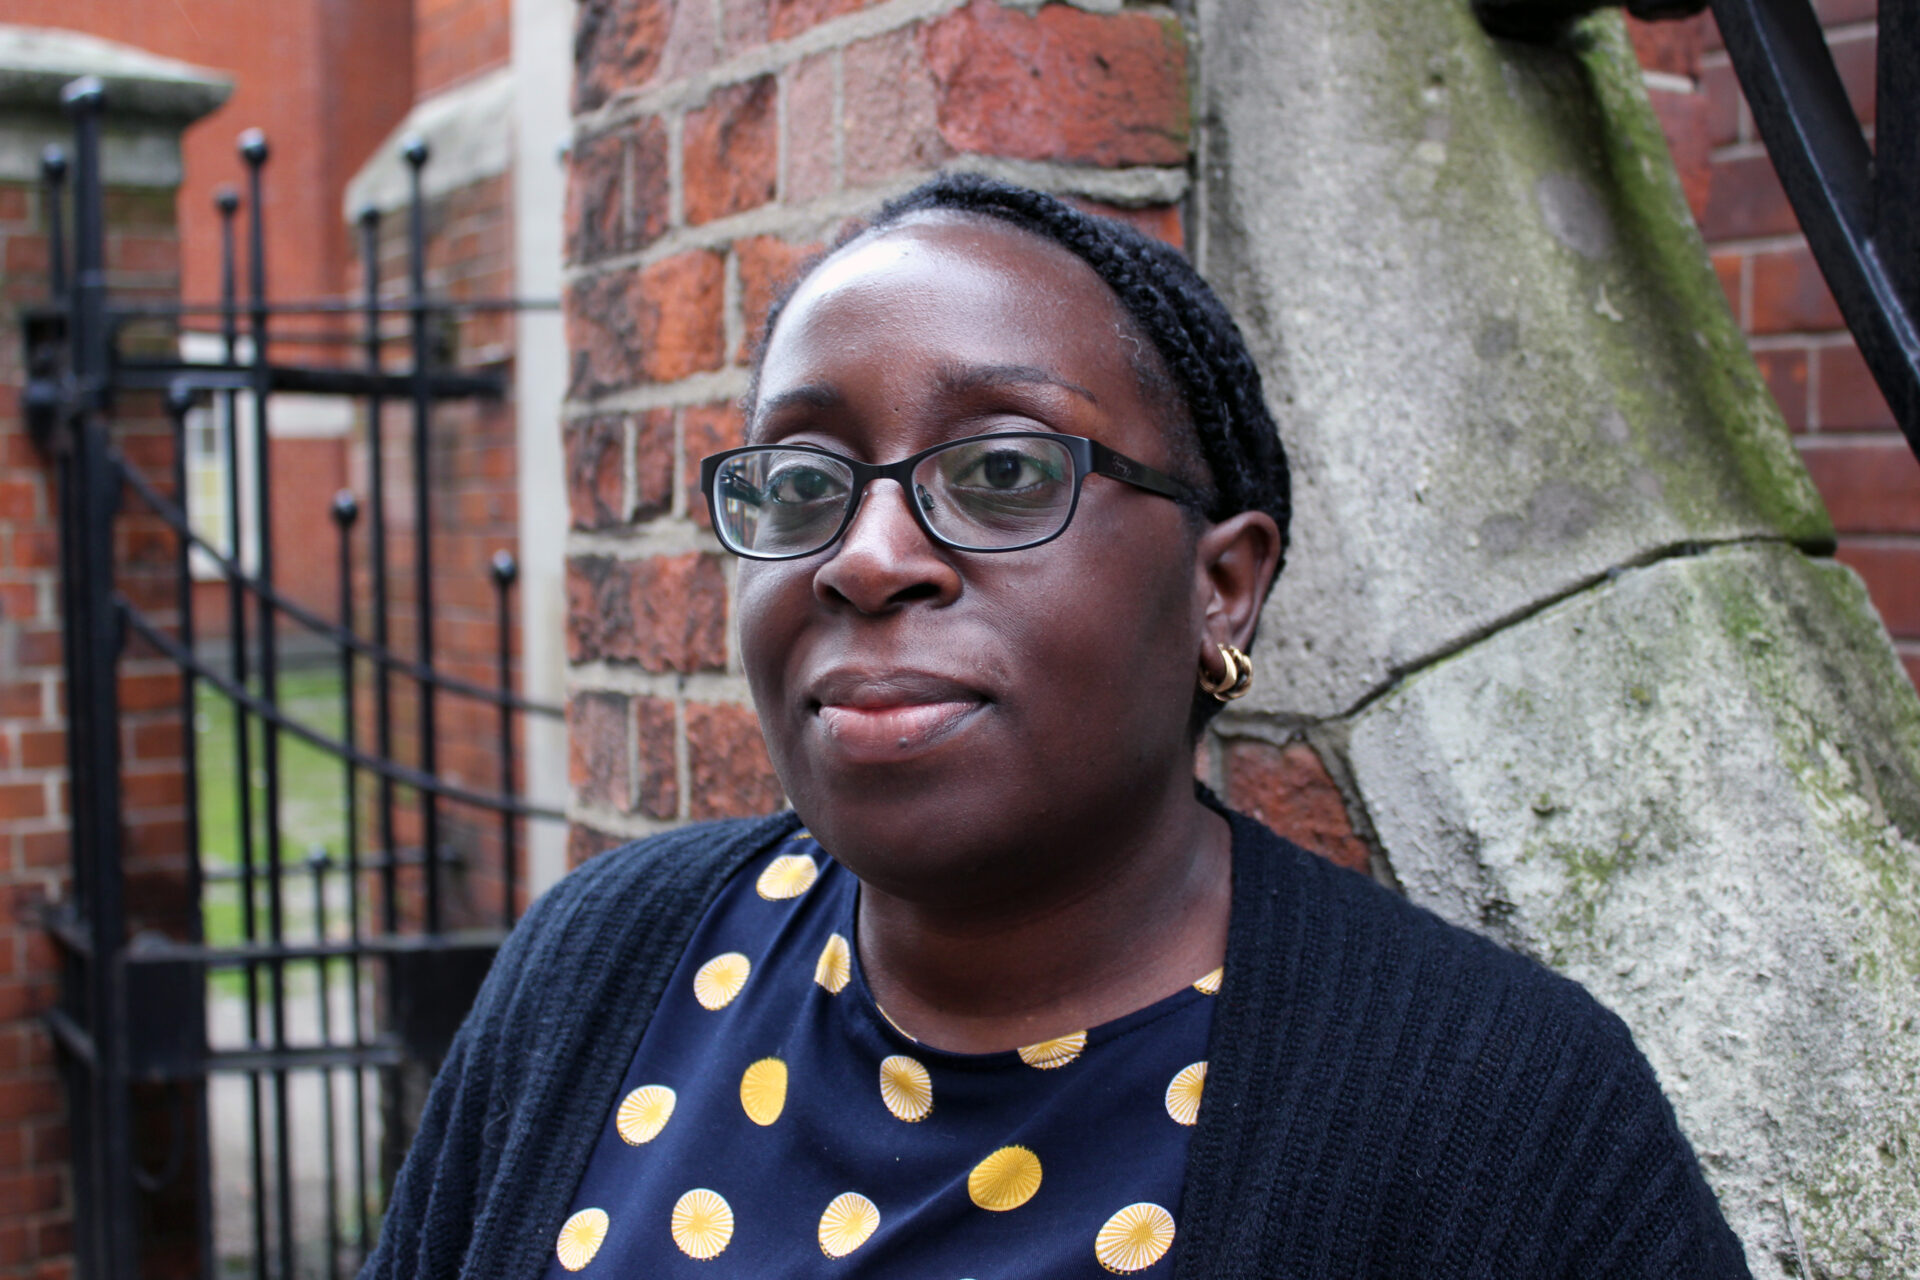 Interview with Yvonne, area manager, on what it is like to work at Thames Reach